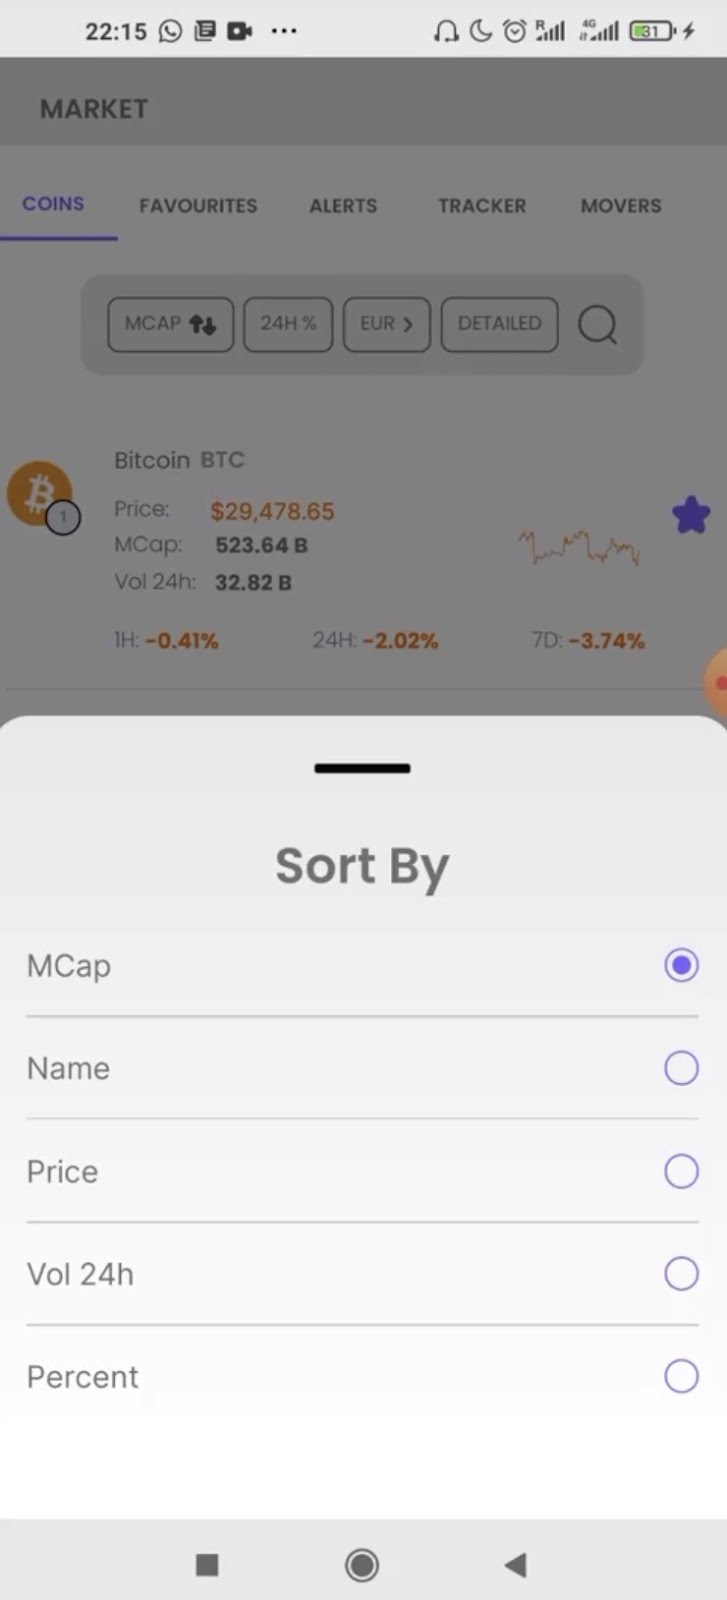 Sort your favorite coins by their market capitalization 